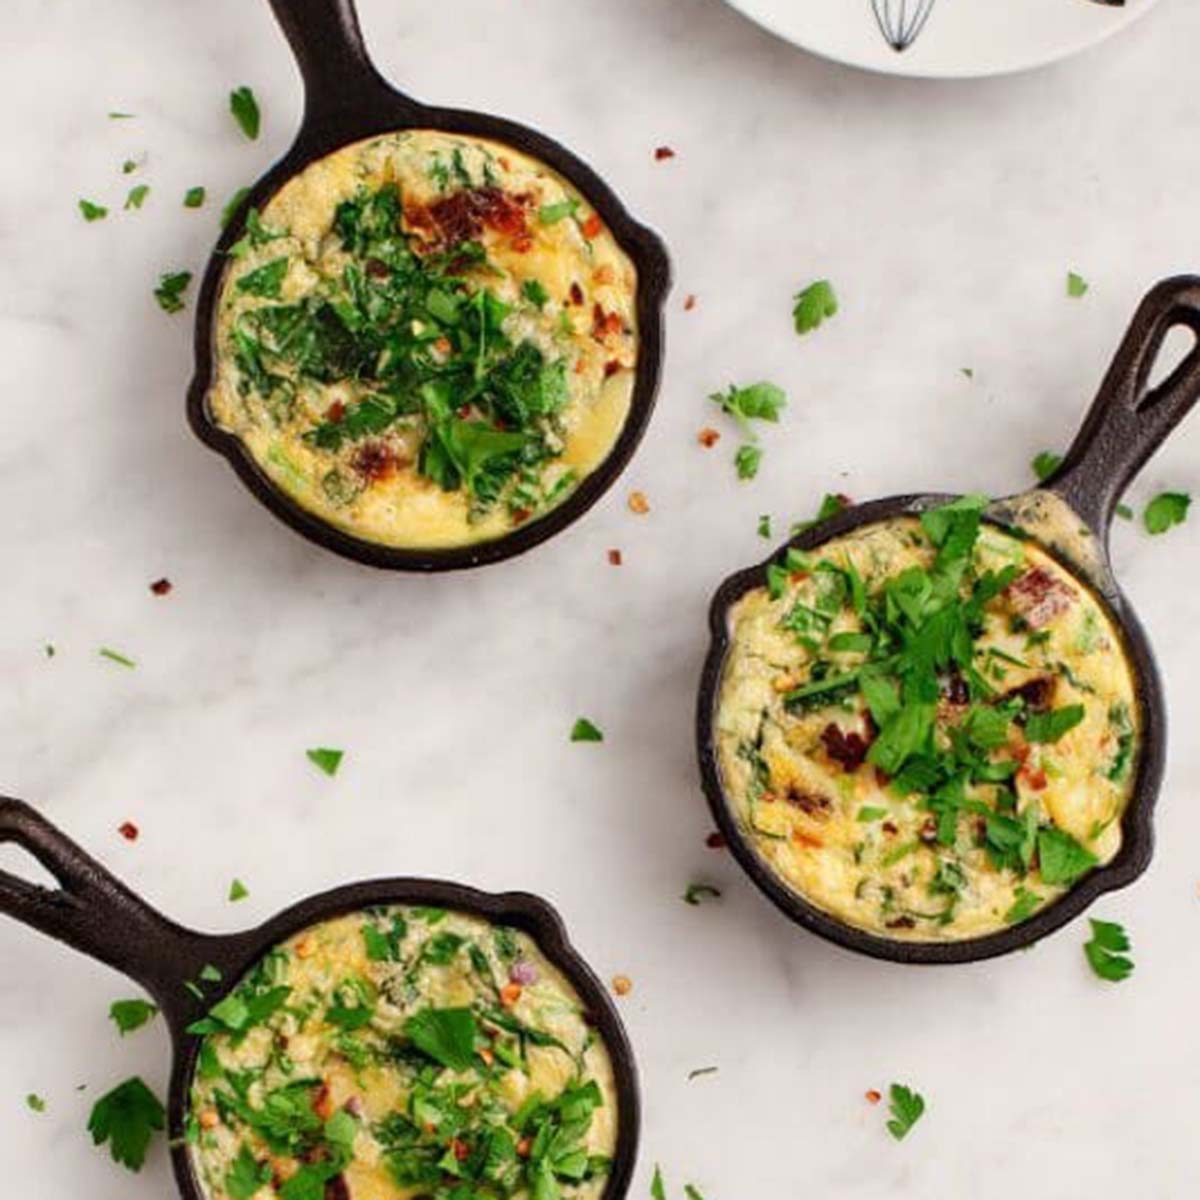 https://www.tasteofhome.com/wp-content/uploads/2019/01/mini-spinach-and-sundried-tomato-frittatas.jpg?fit=700%2C700